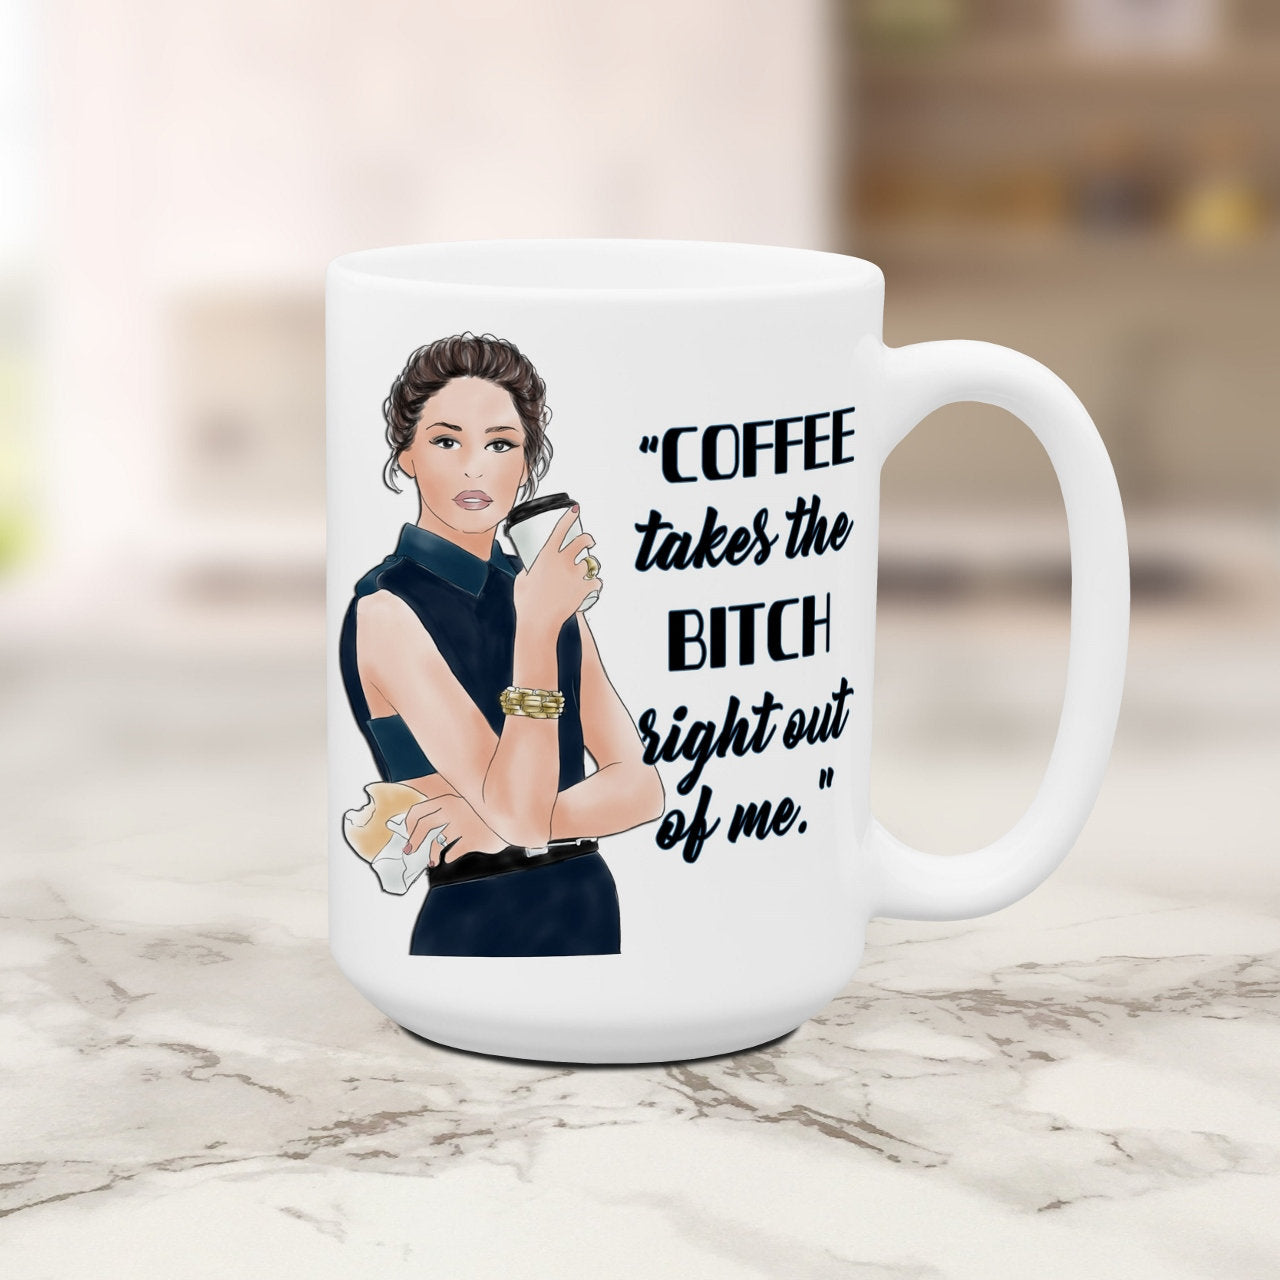 Office Coffee Cups Funny Sassy Attitude Mugs for Women Coffee Takes the Bitch Out of Me